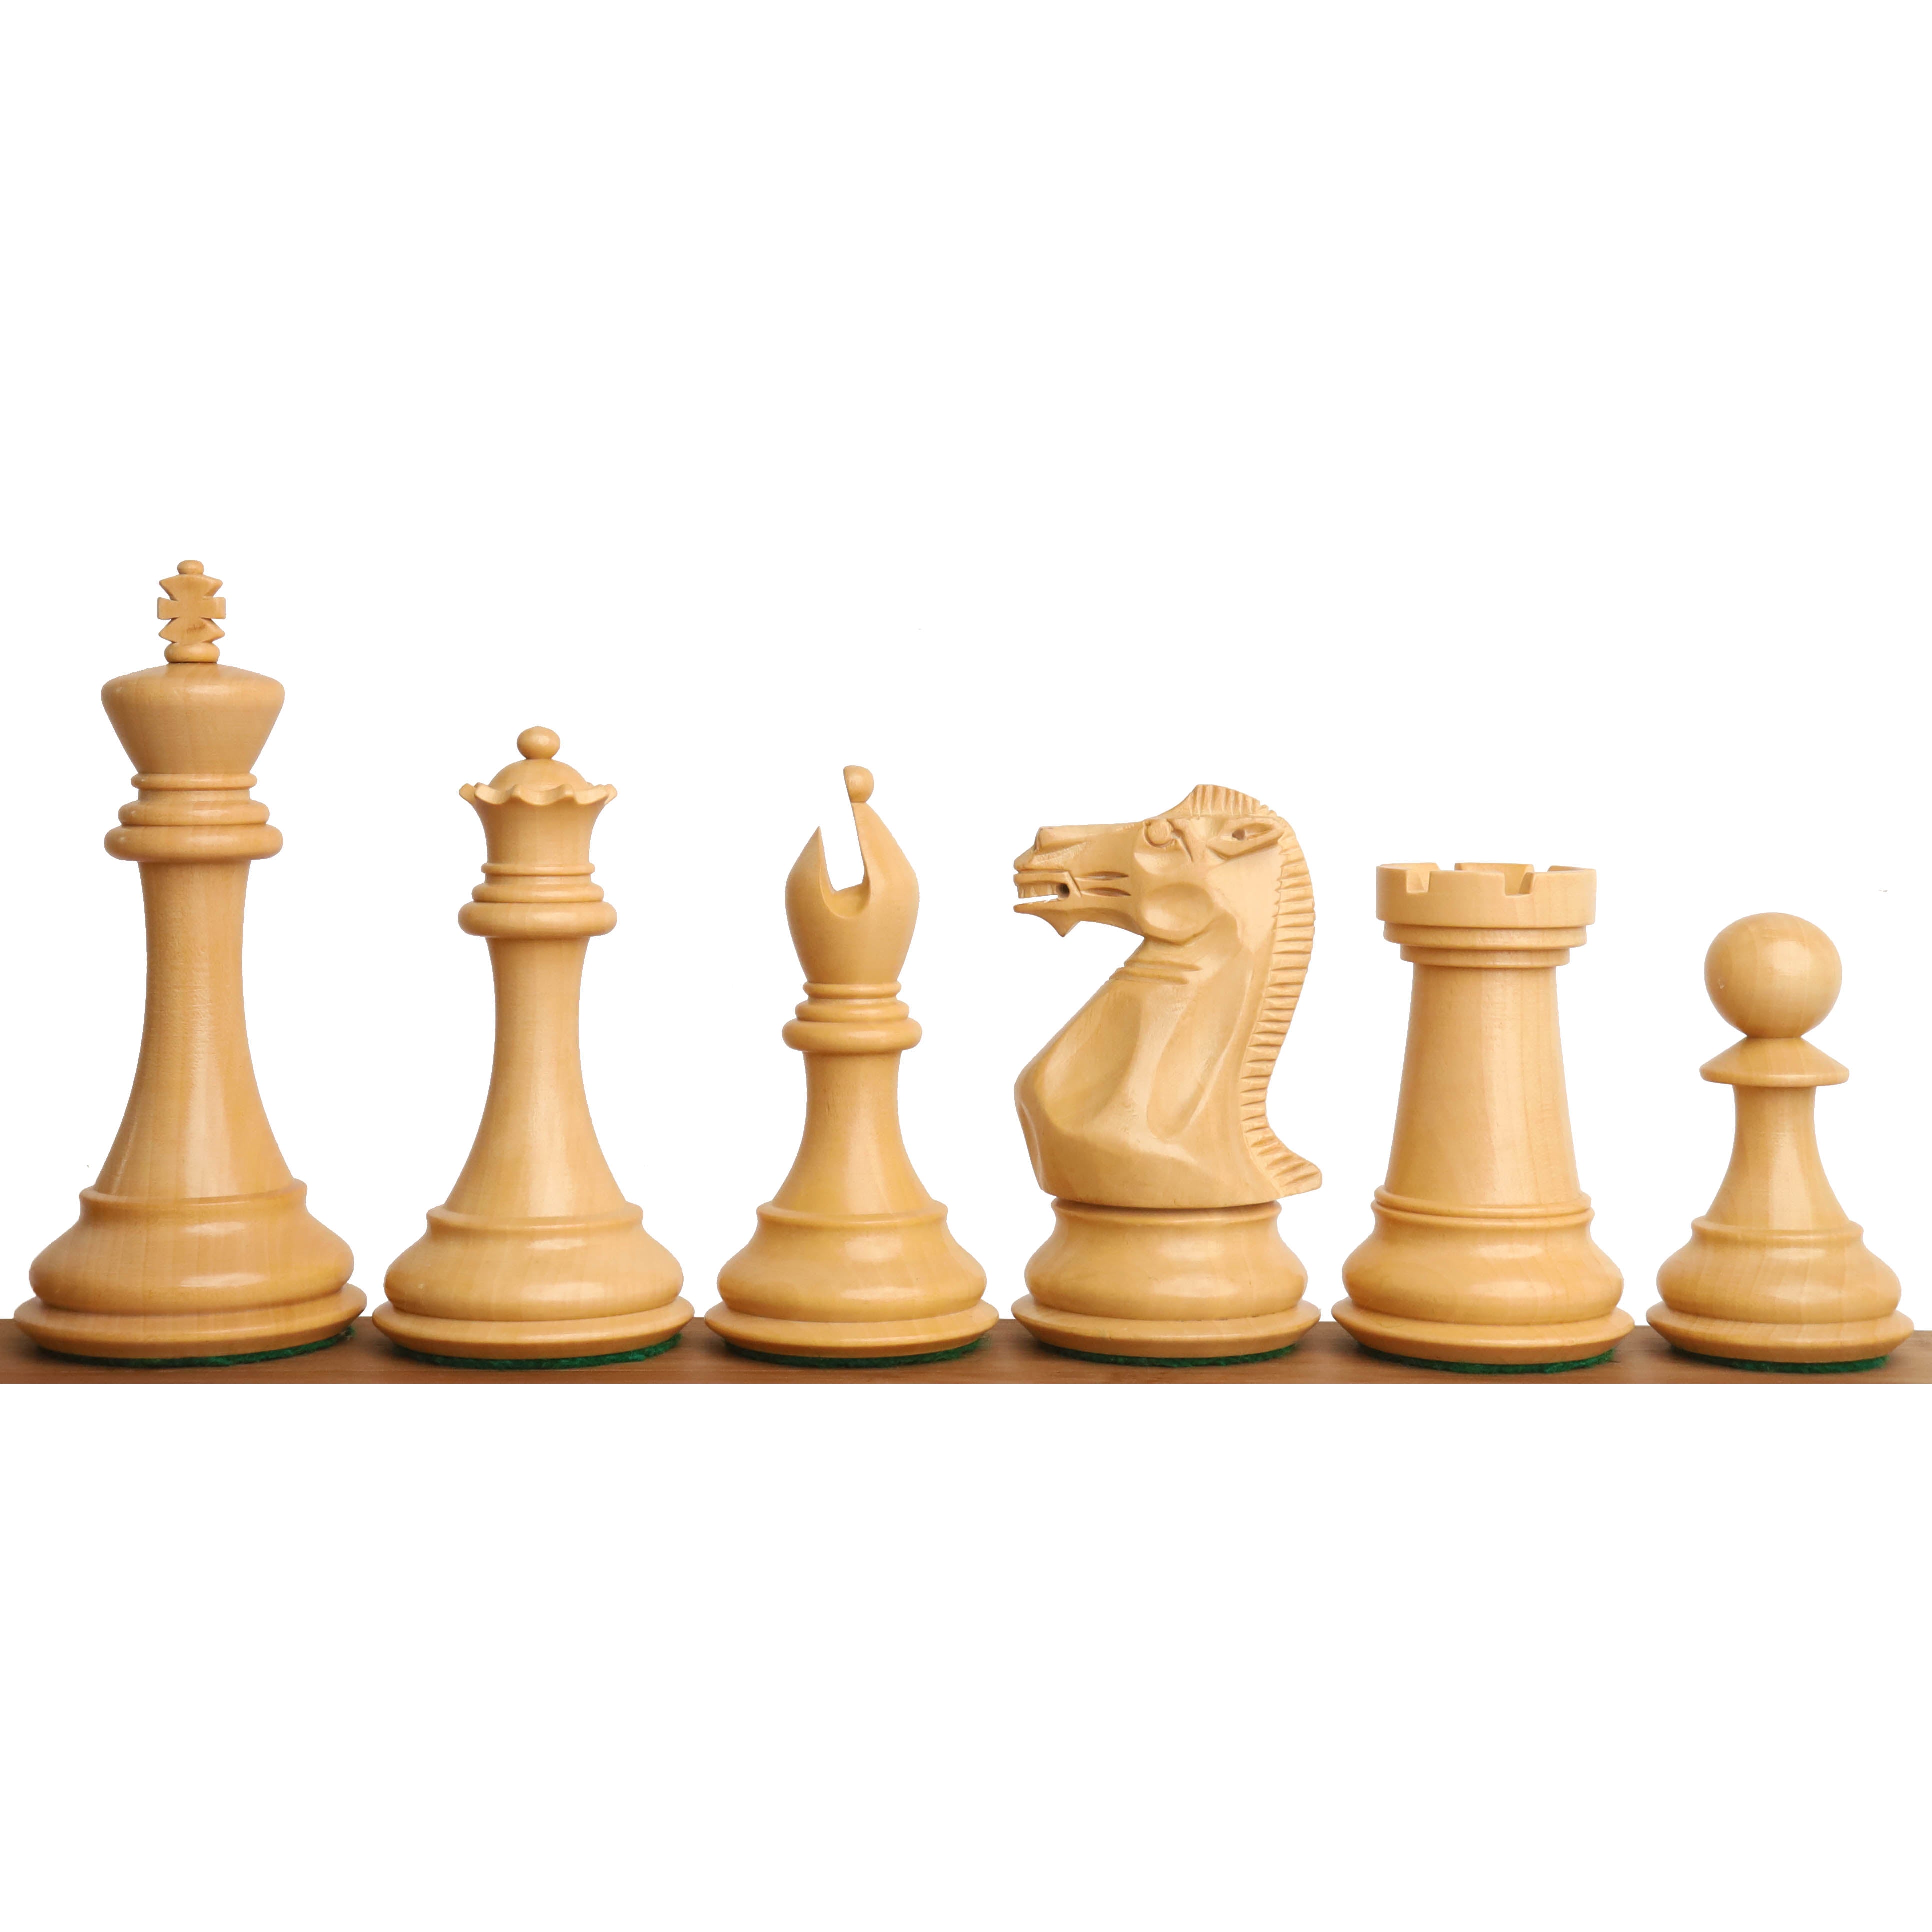 4" Sleek Staunton Luxury Chess Set- Chess Pieces Only - Triple Weighted Bud Rose Wood